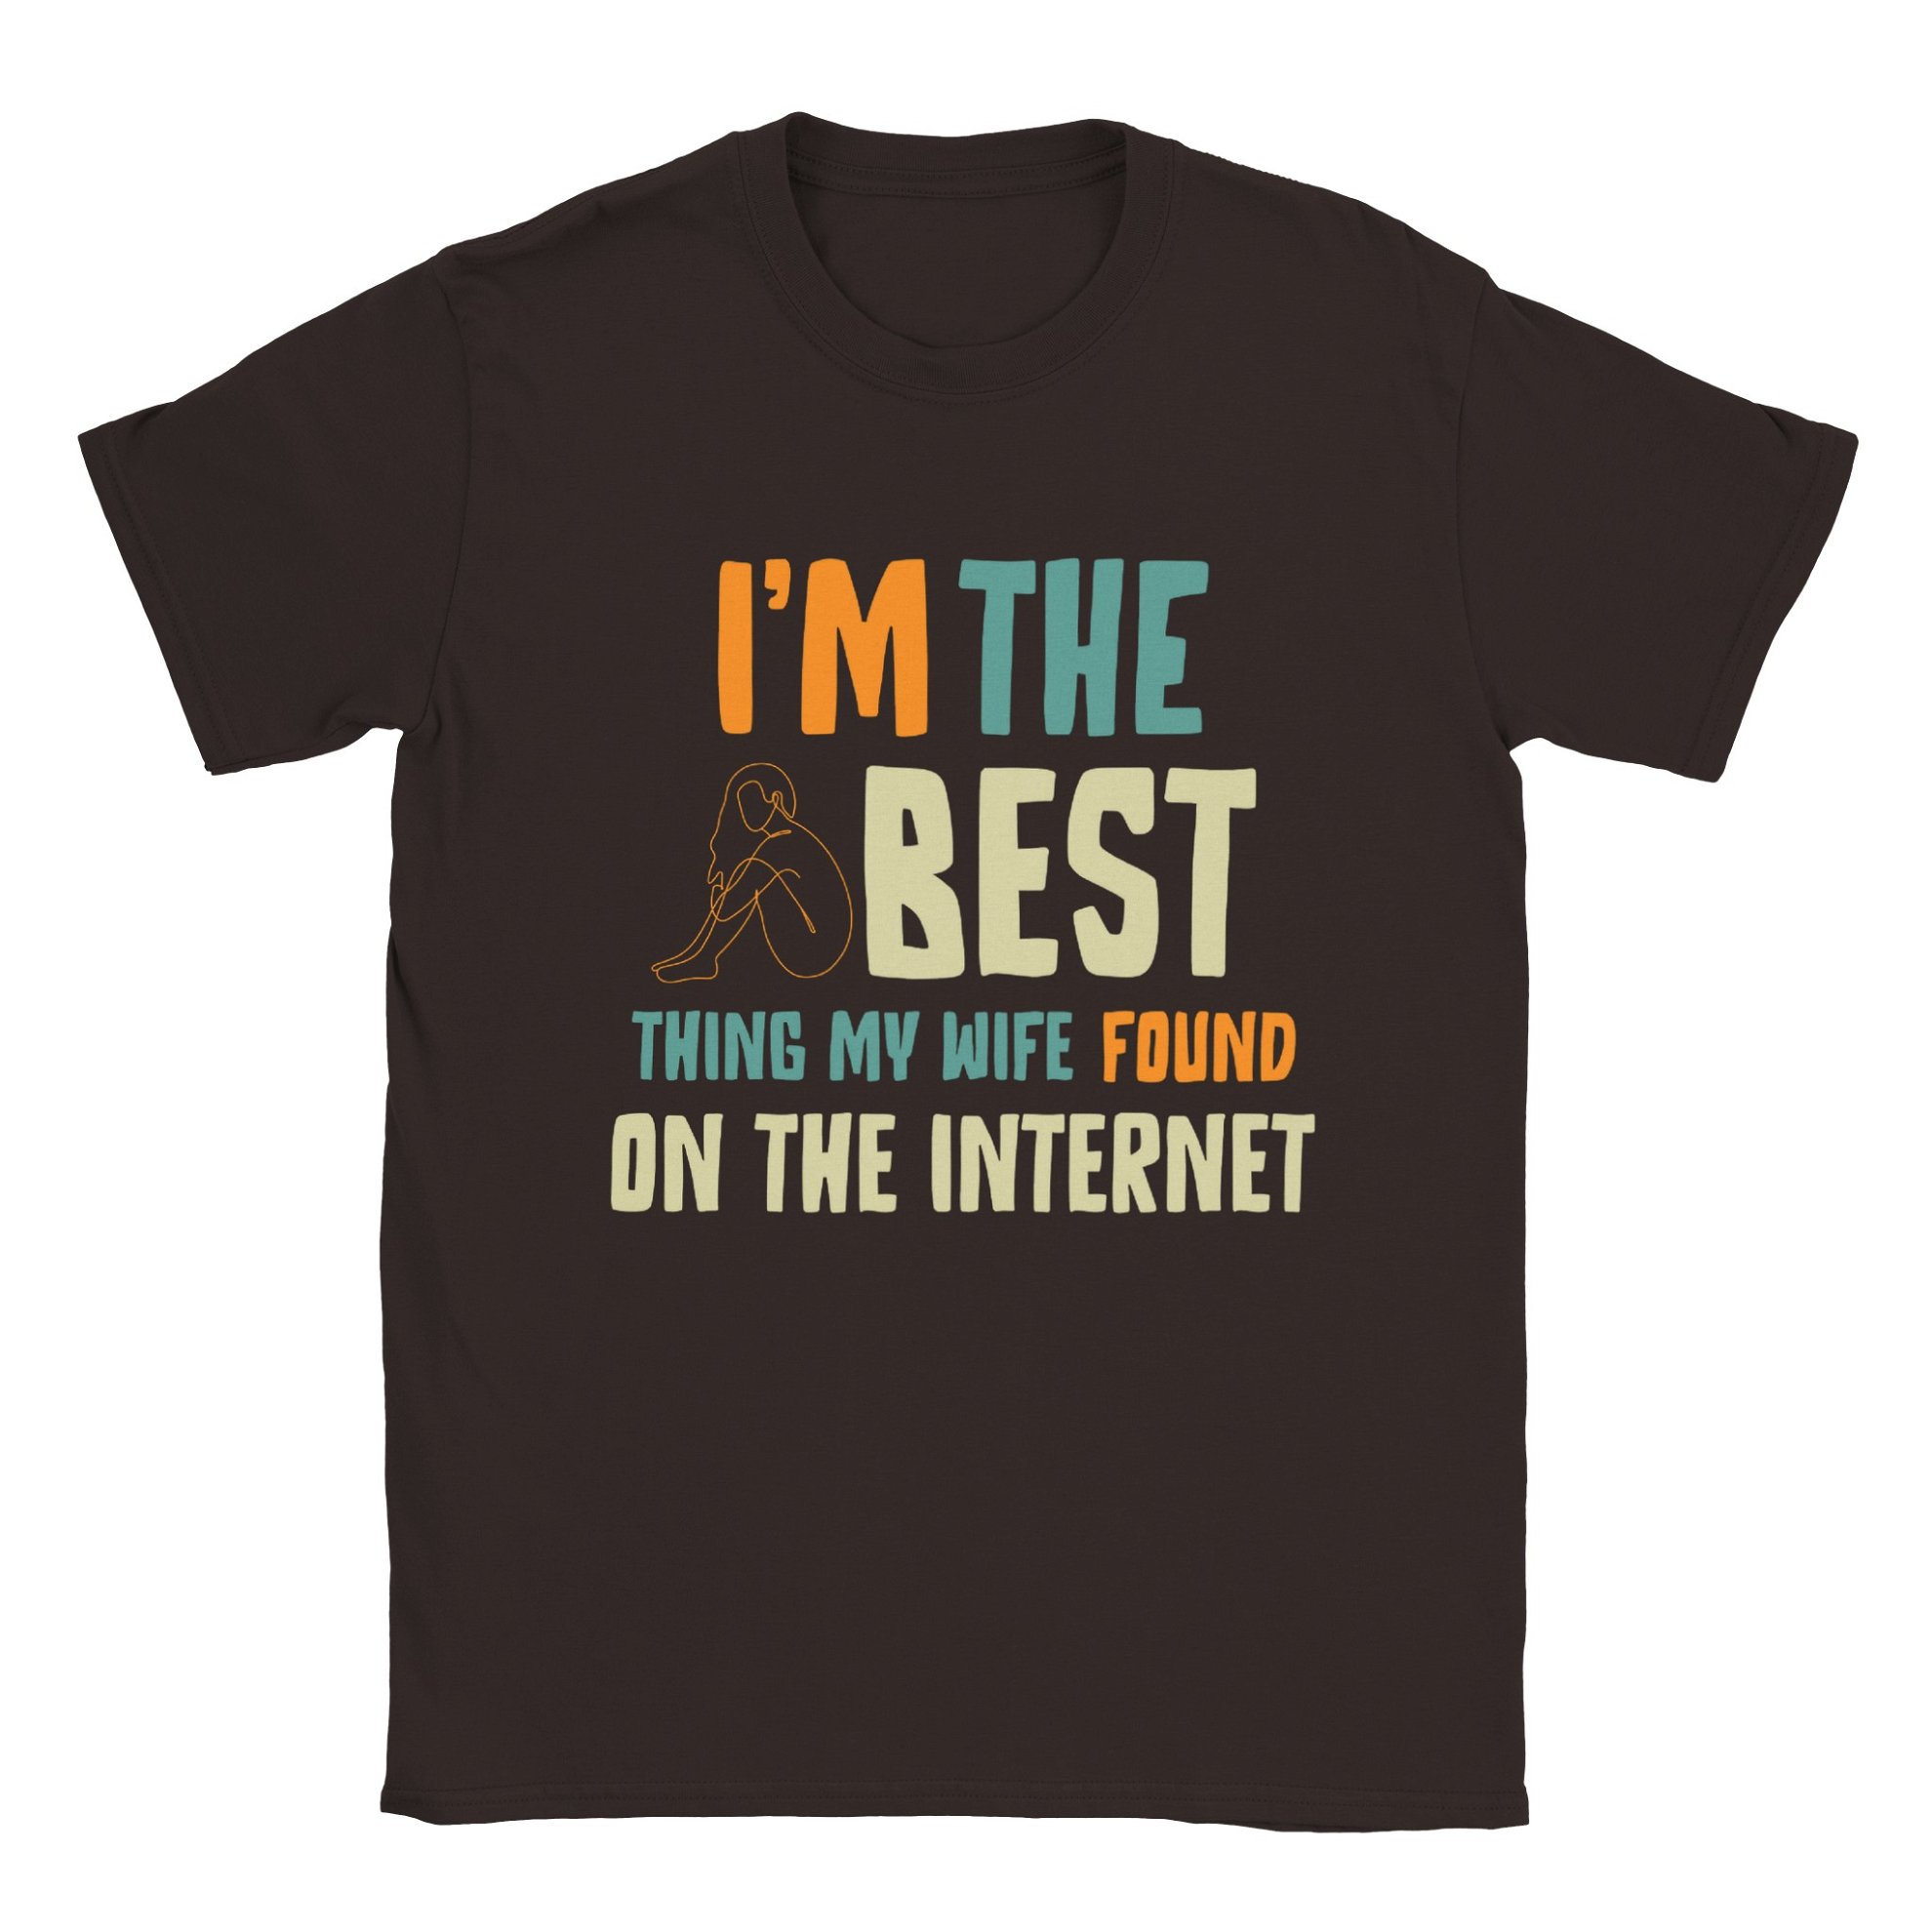 Best Thing My Wife Found on the Internet T-Shirt